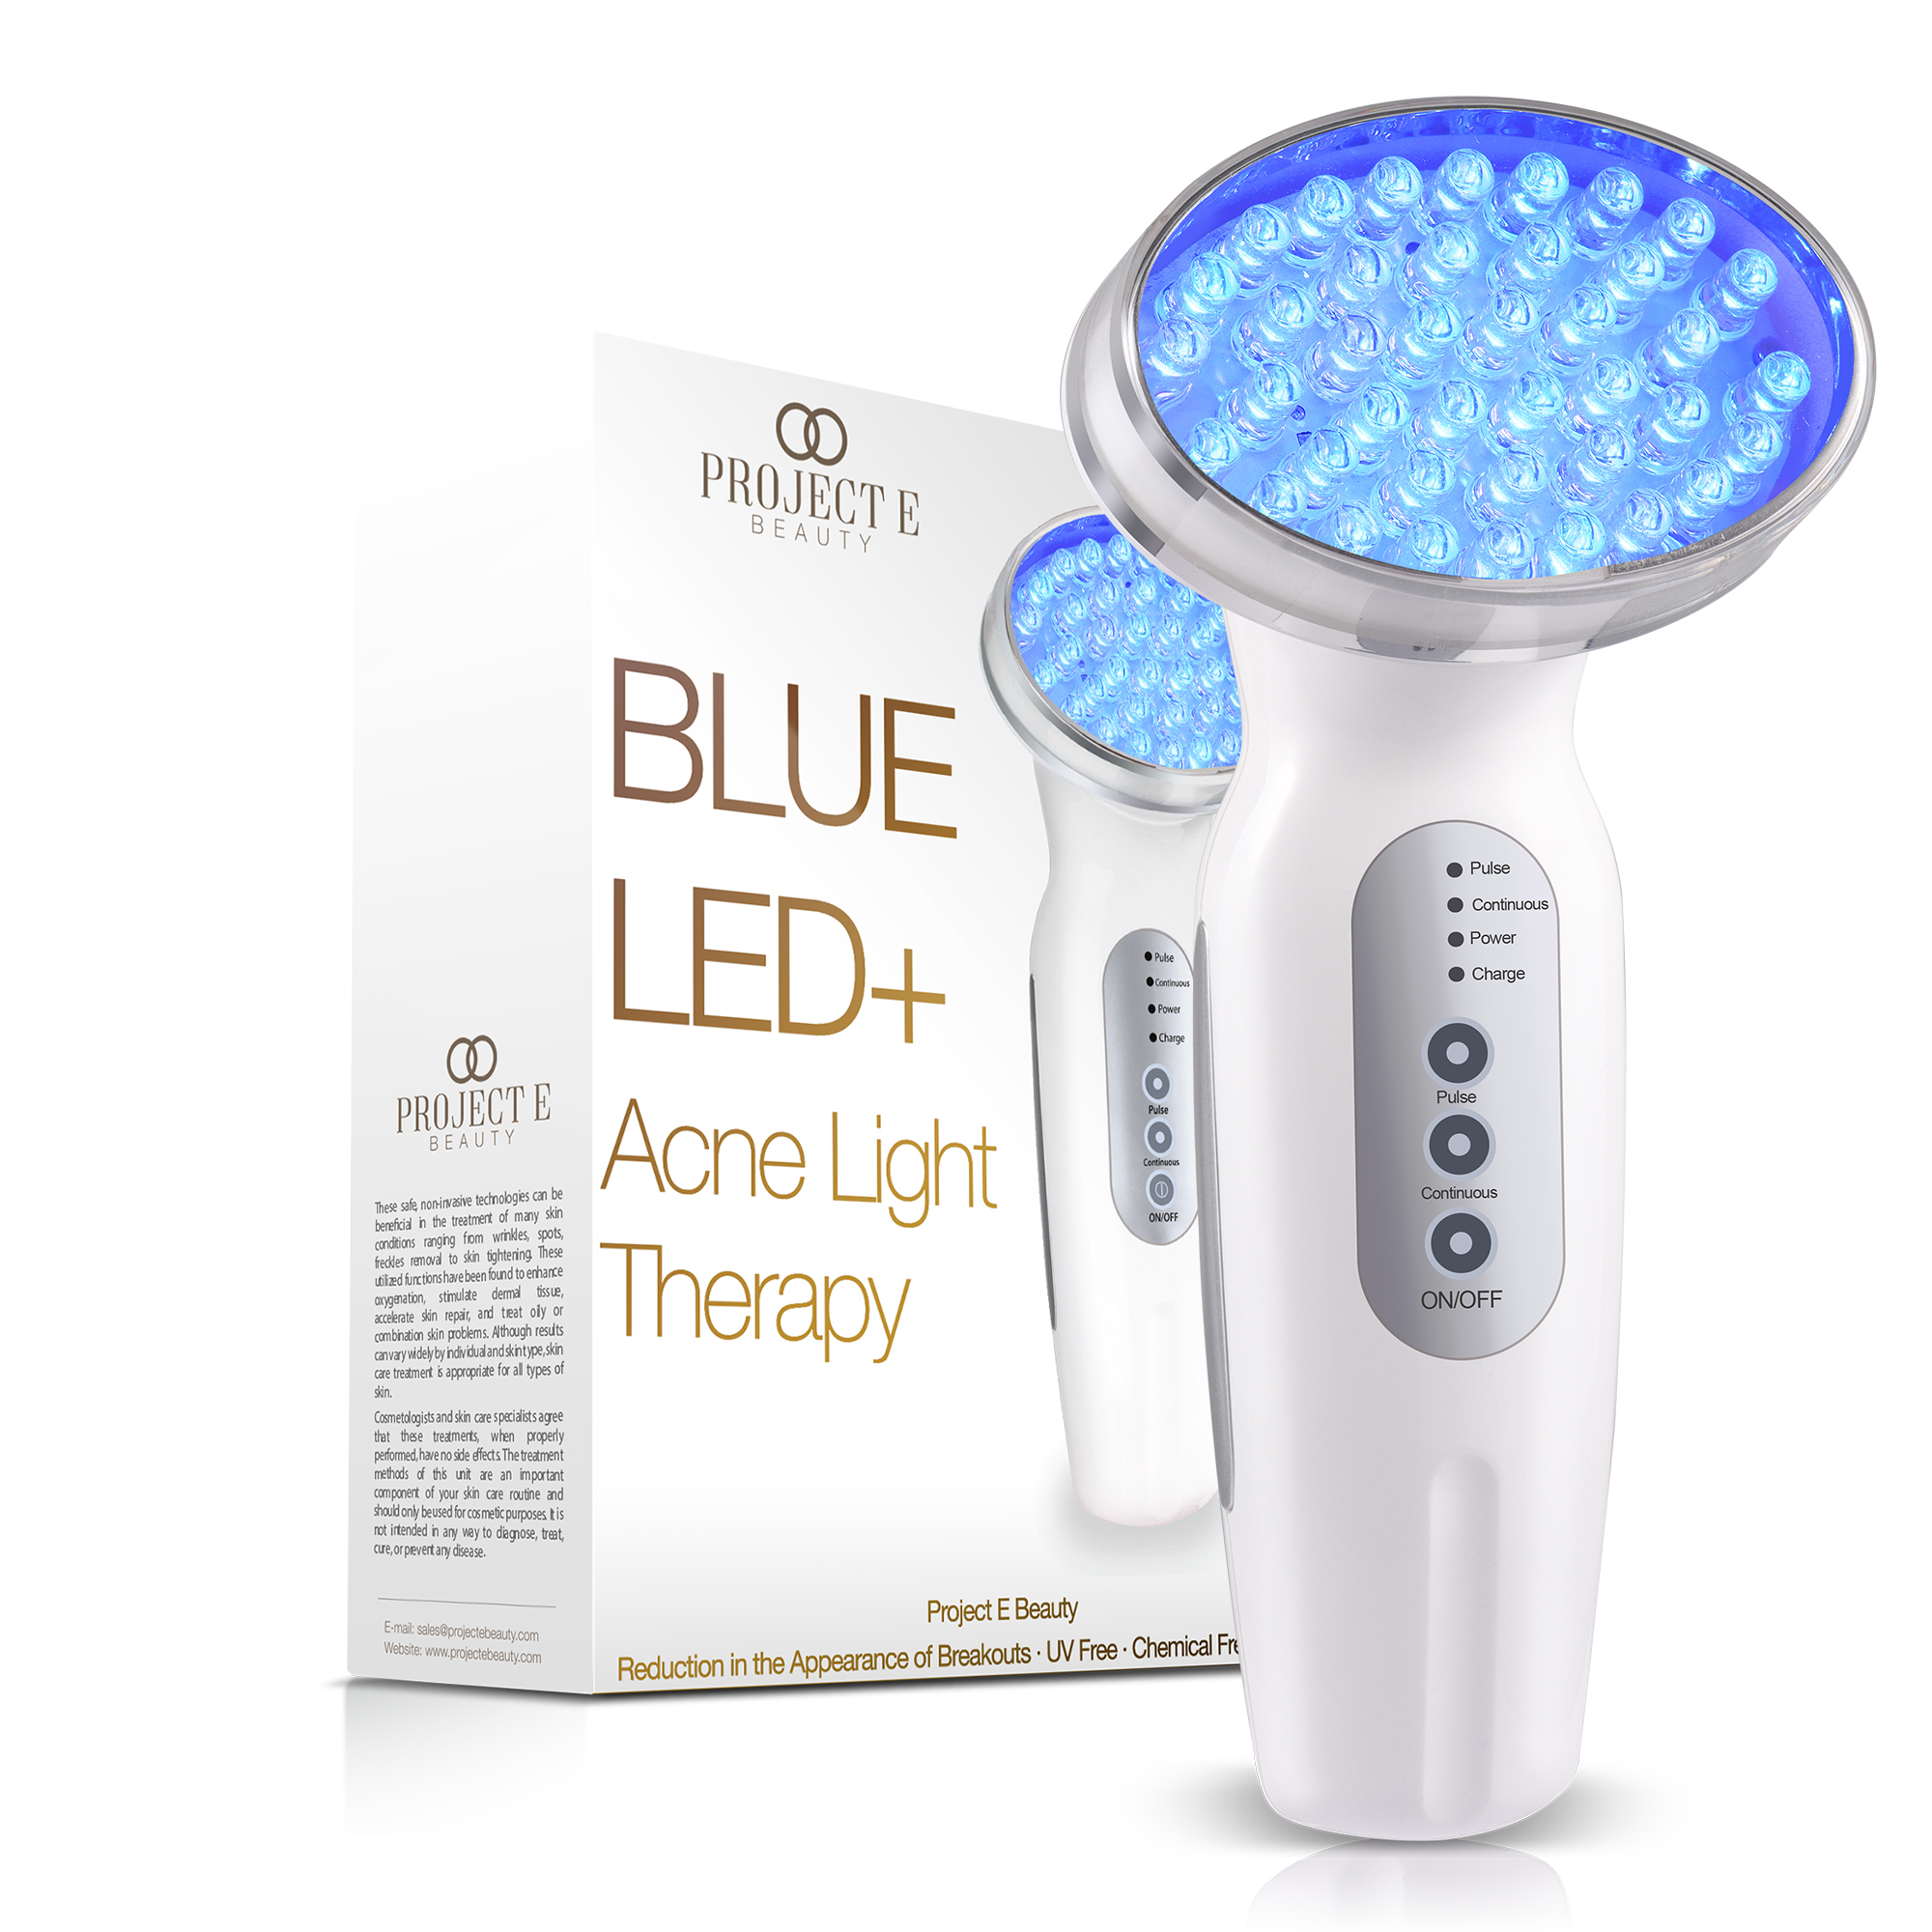 Project E Beauty Blue LED+ | Acne Light Therapy | Spots Removal | Minimize Pores | for Oily Skin - image 1 of 9